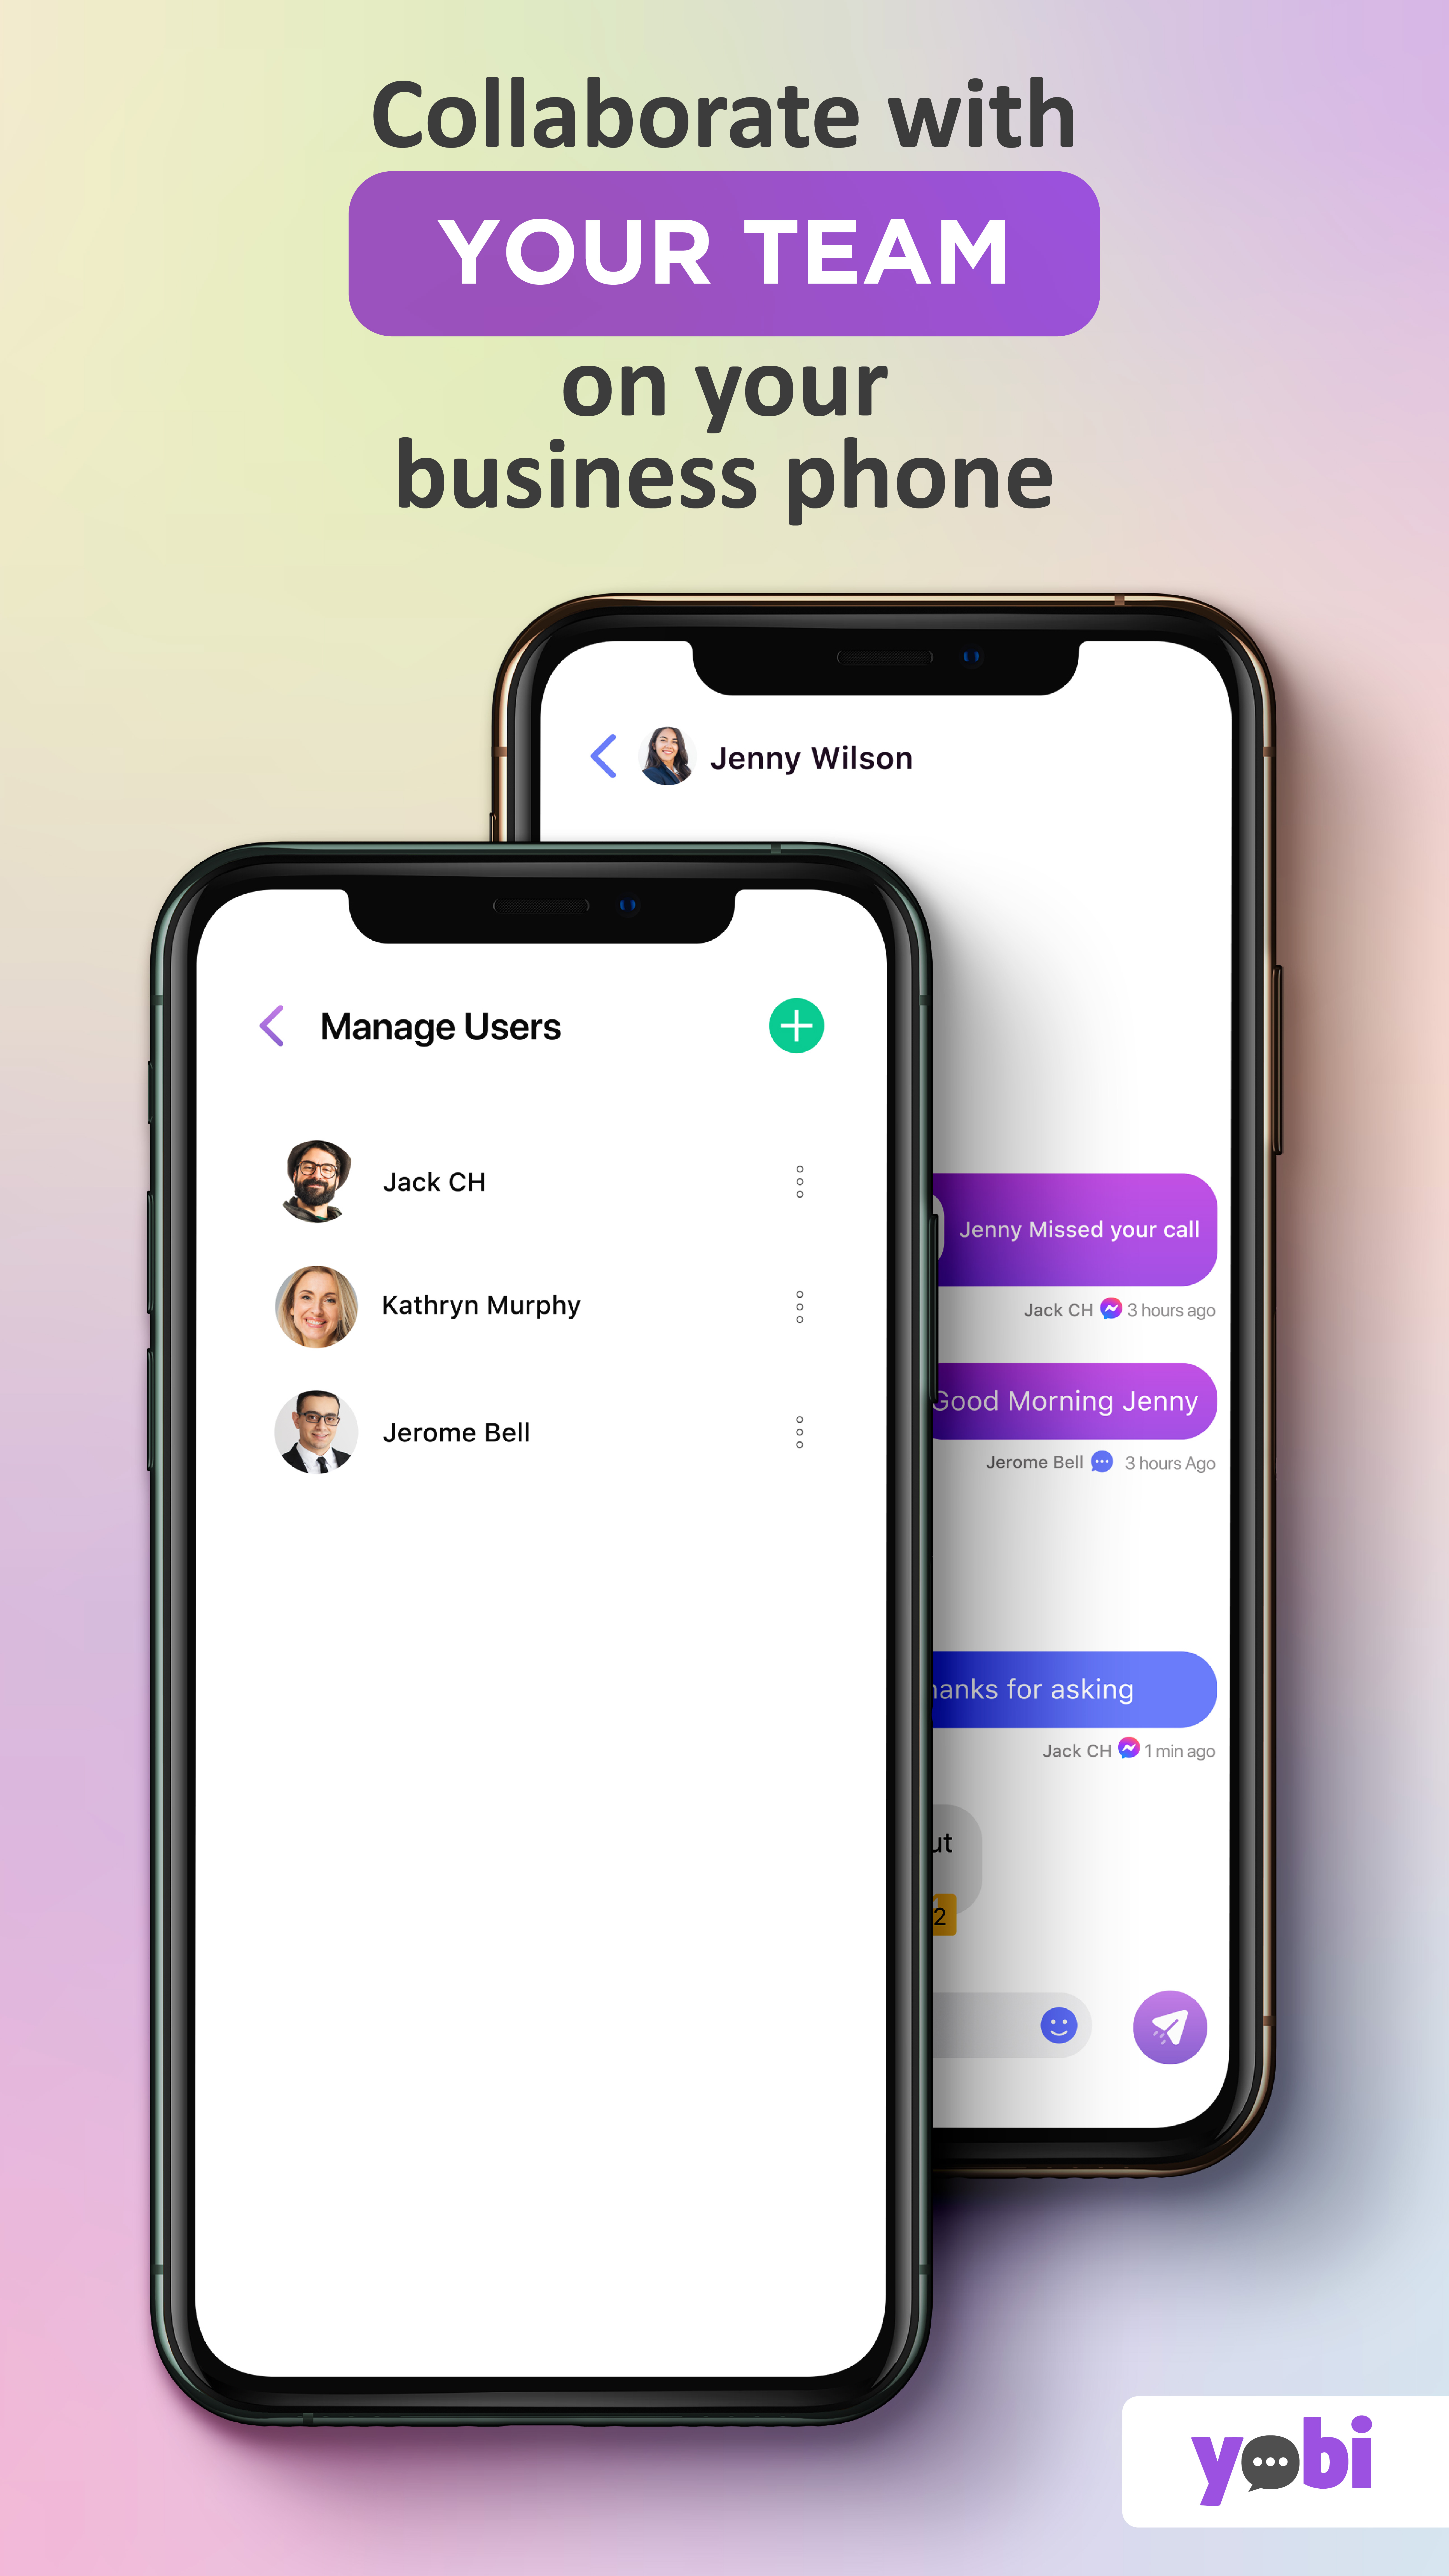 You can invite your entire team to Yobi and hand-off conversations instantly. Record calls so that others can gain insights into business relationships and track call quality at the same time.